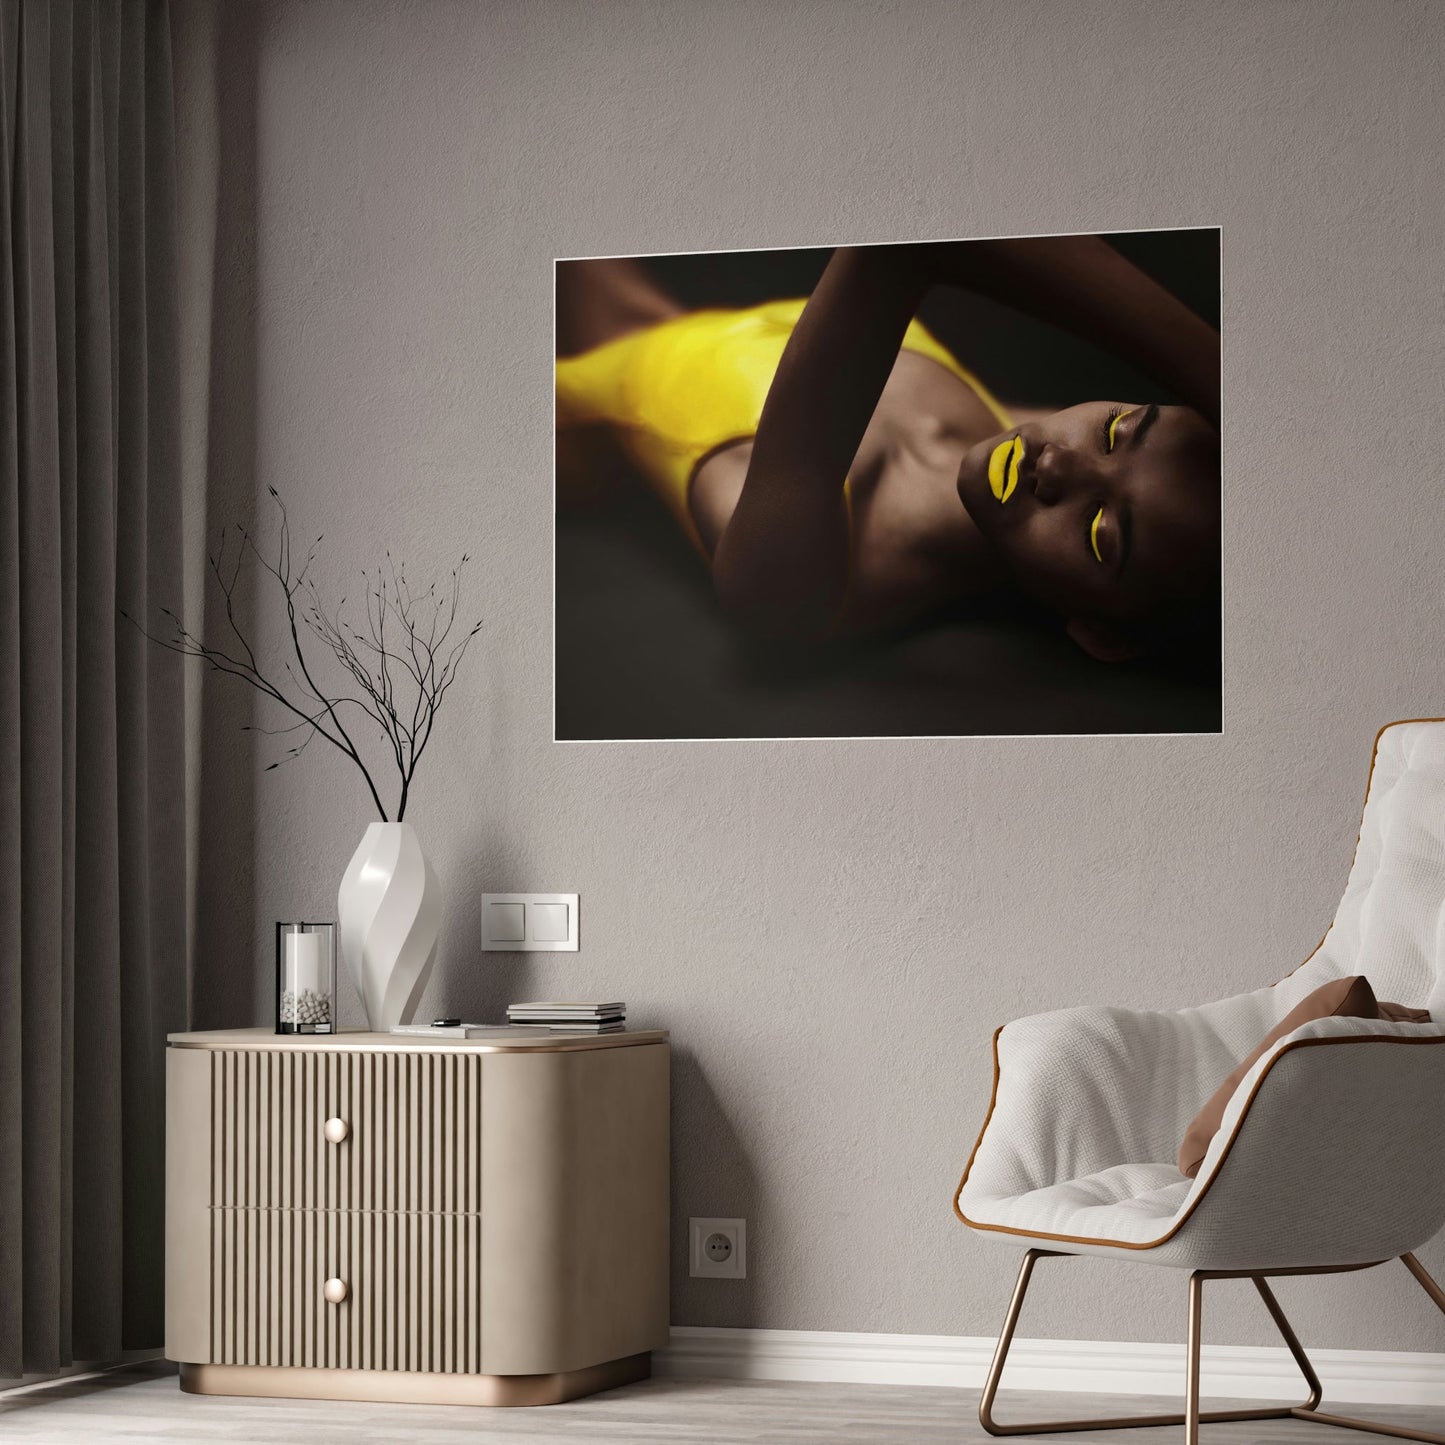 Fashionista Frenzy: A Natural Canvas Print of Beauty and Fashion